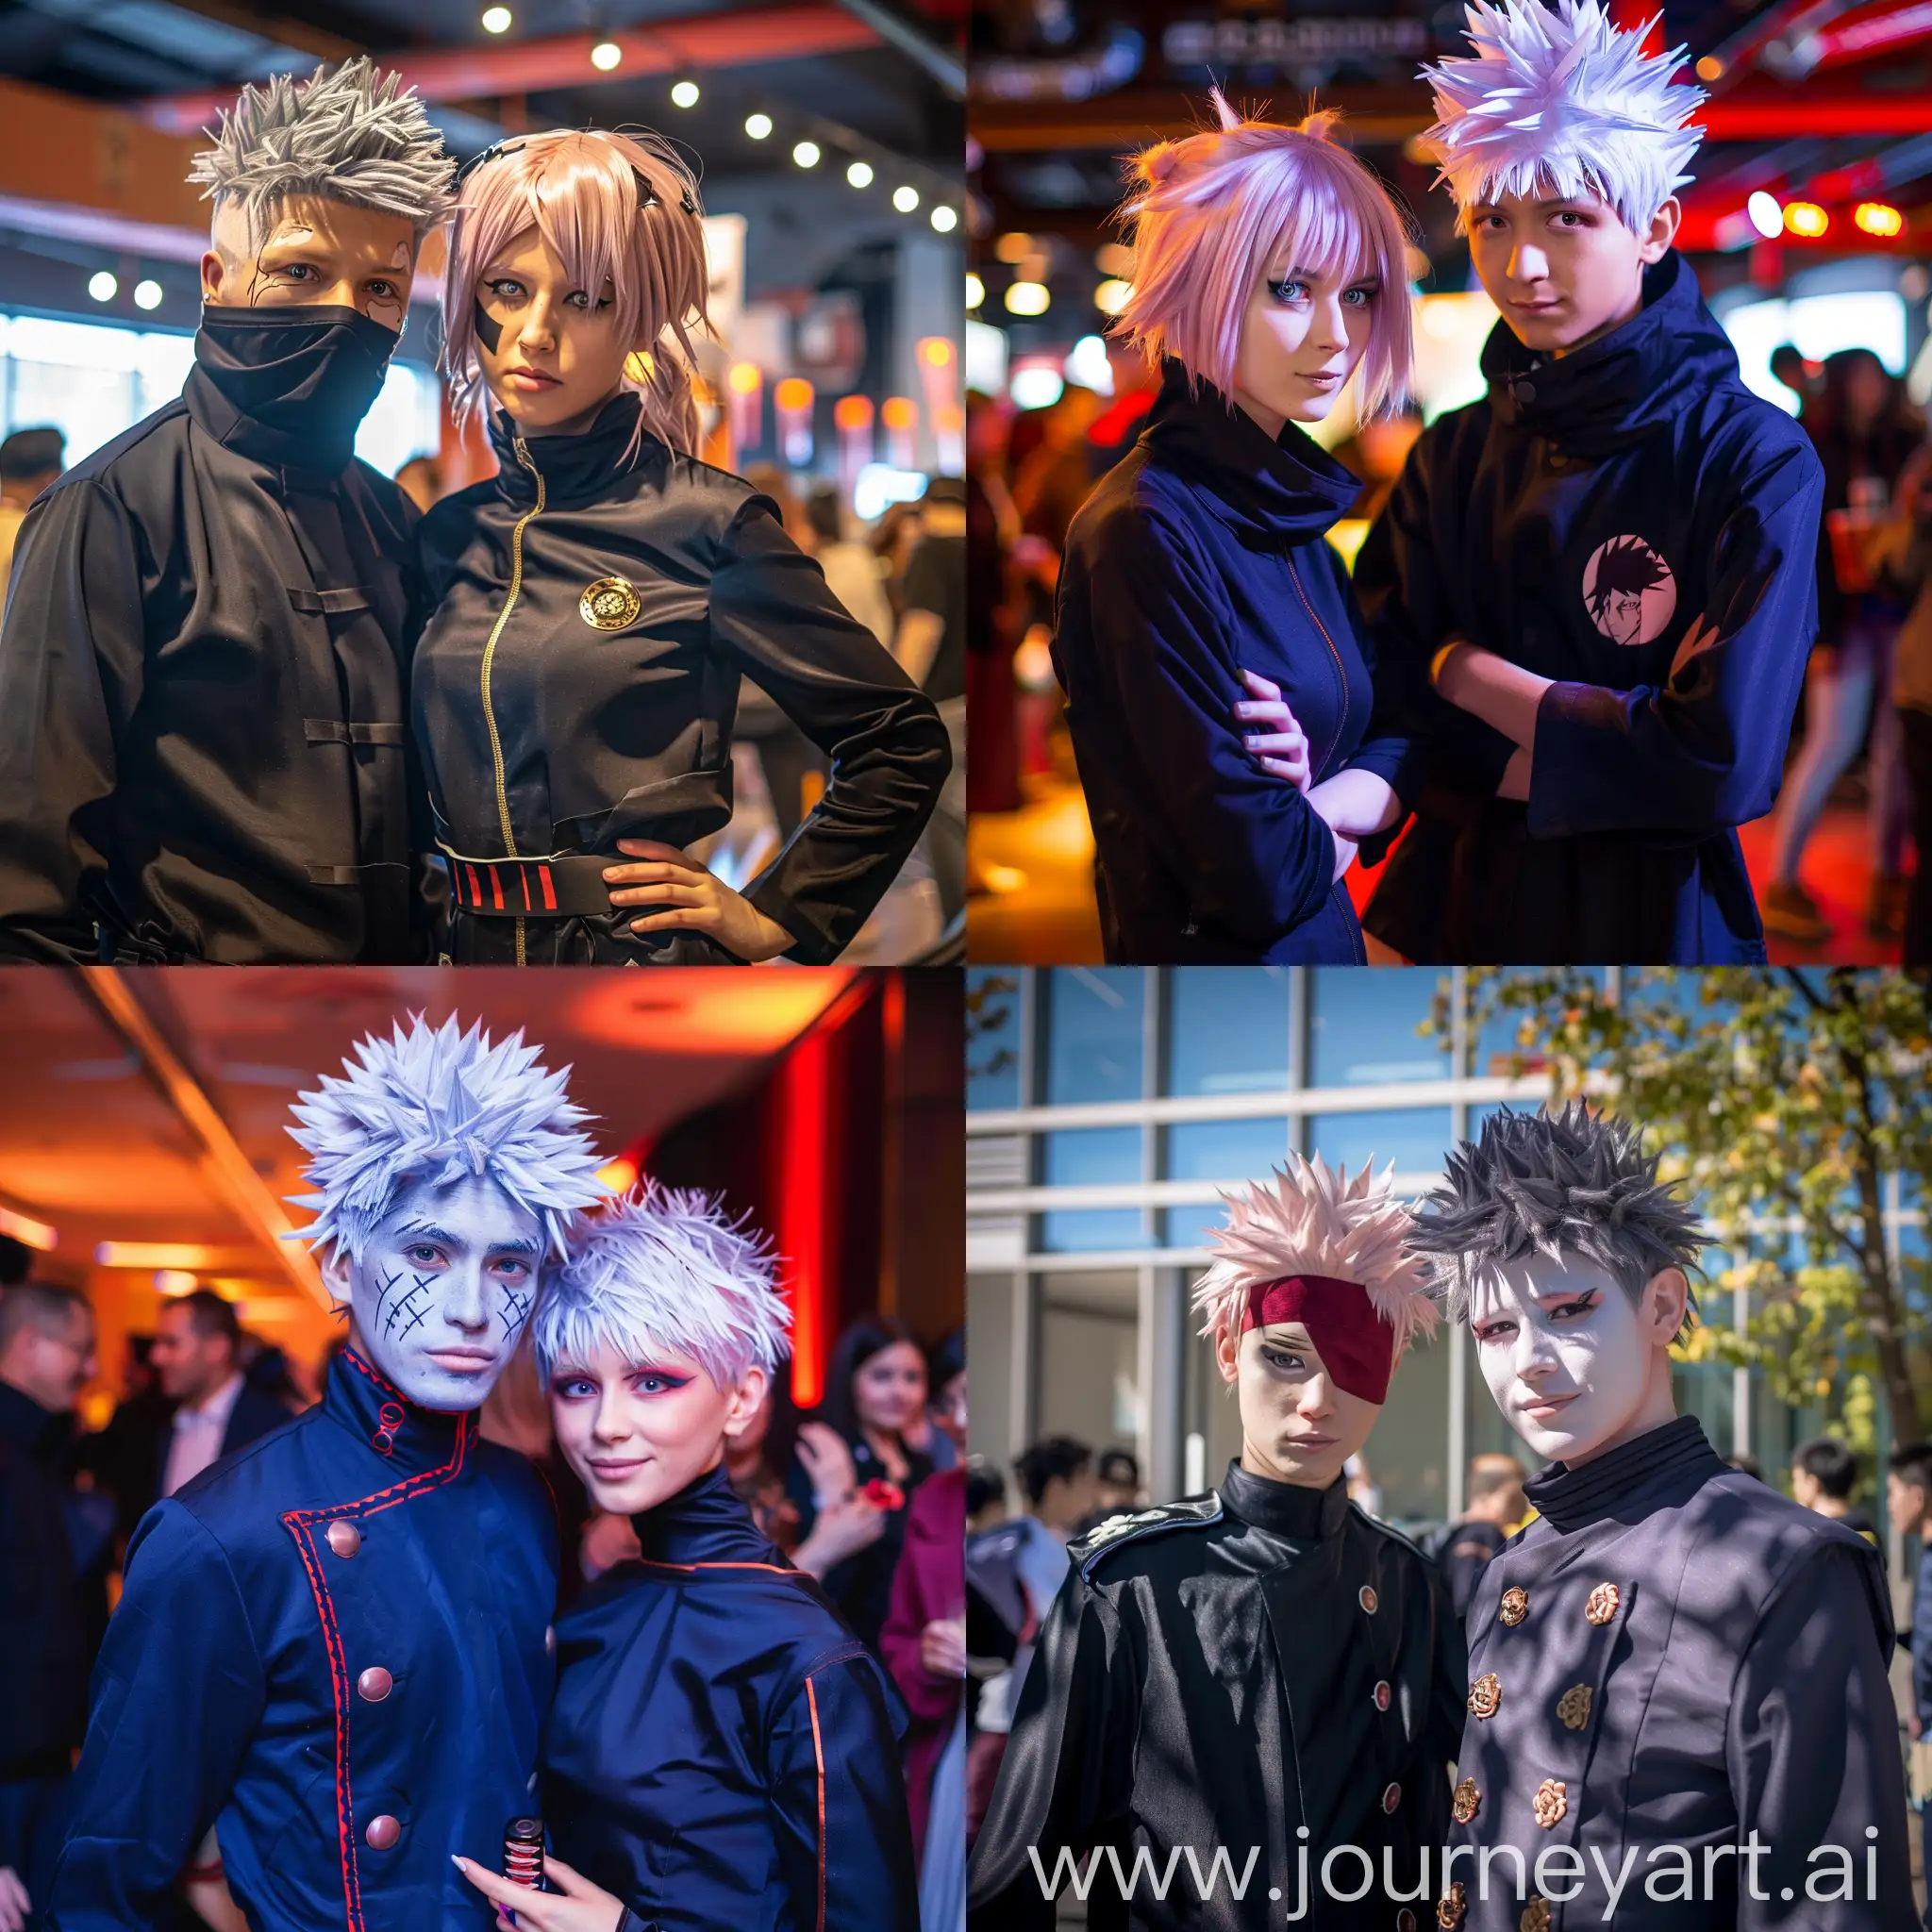 Gojo with the anime "Jujutsu Kaisen" at a social event in costume